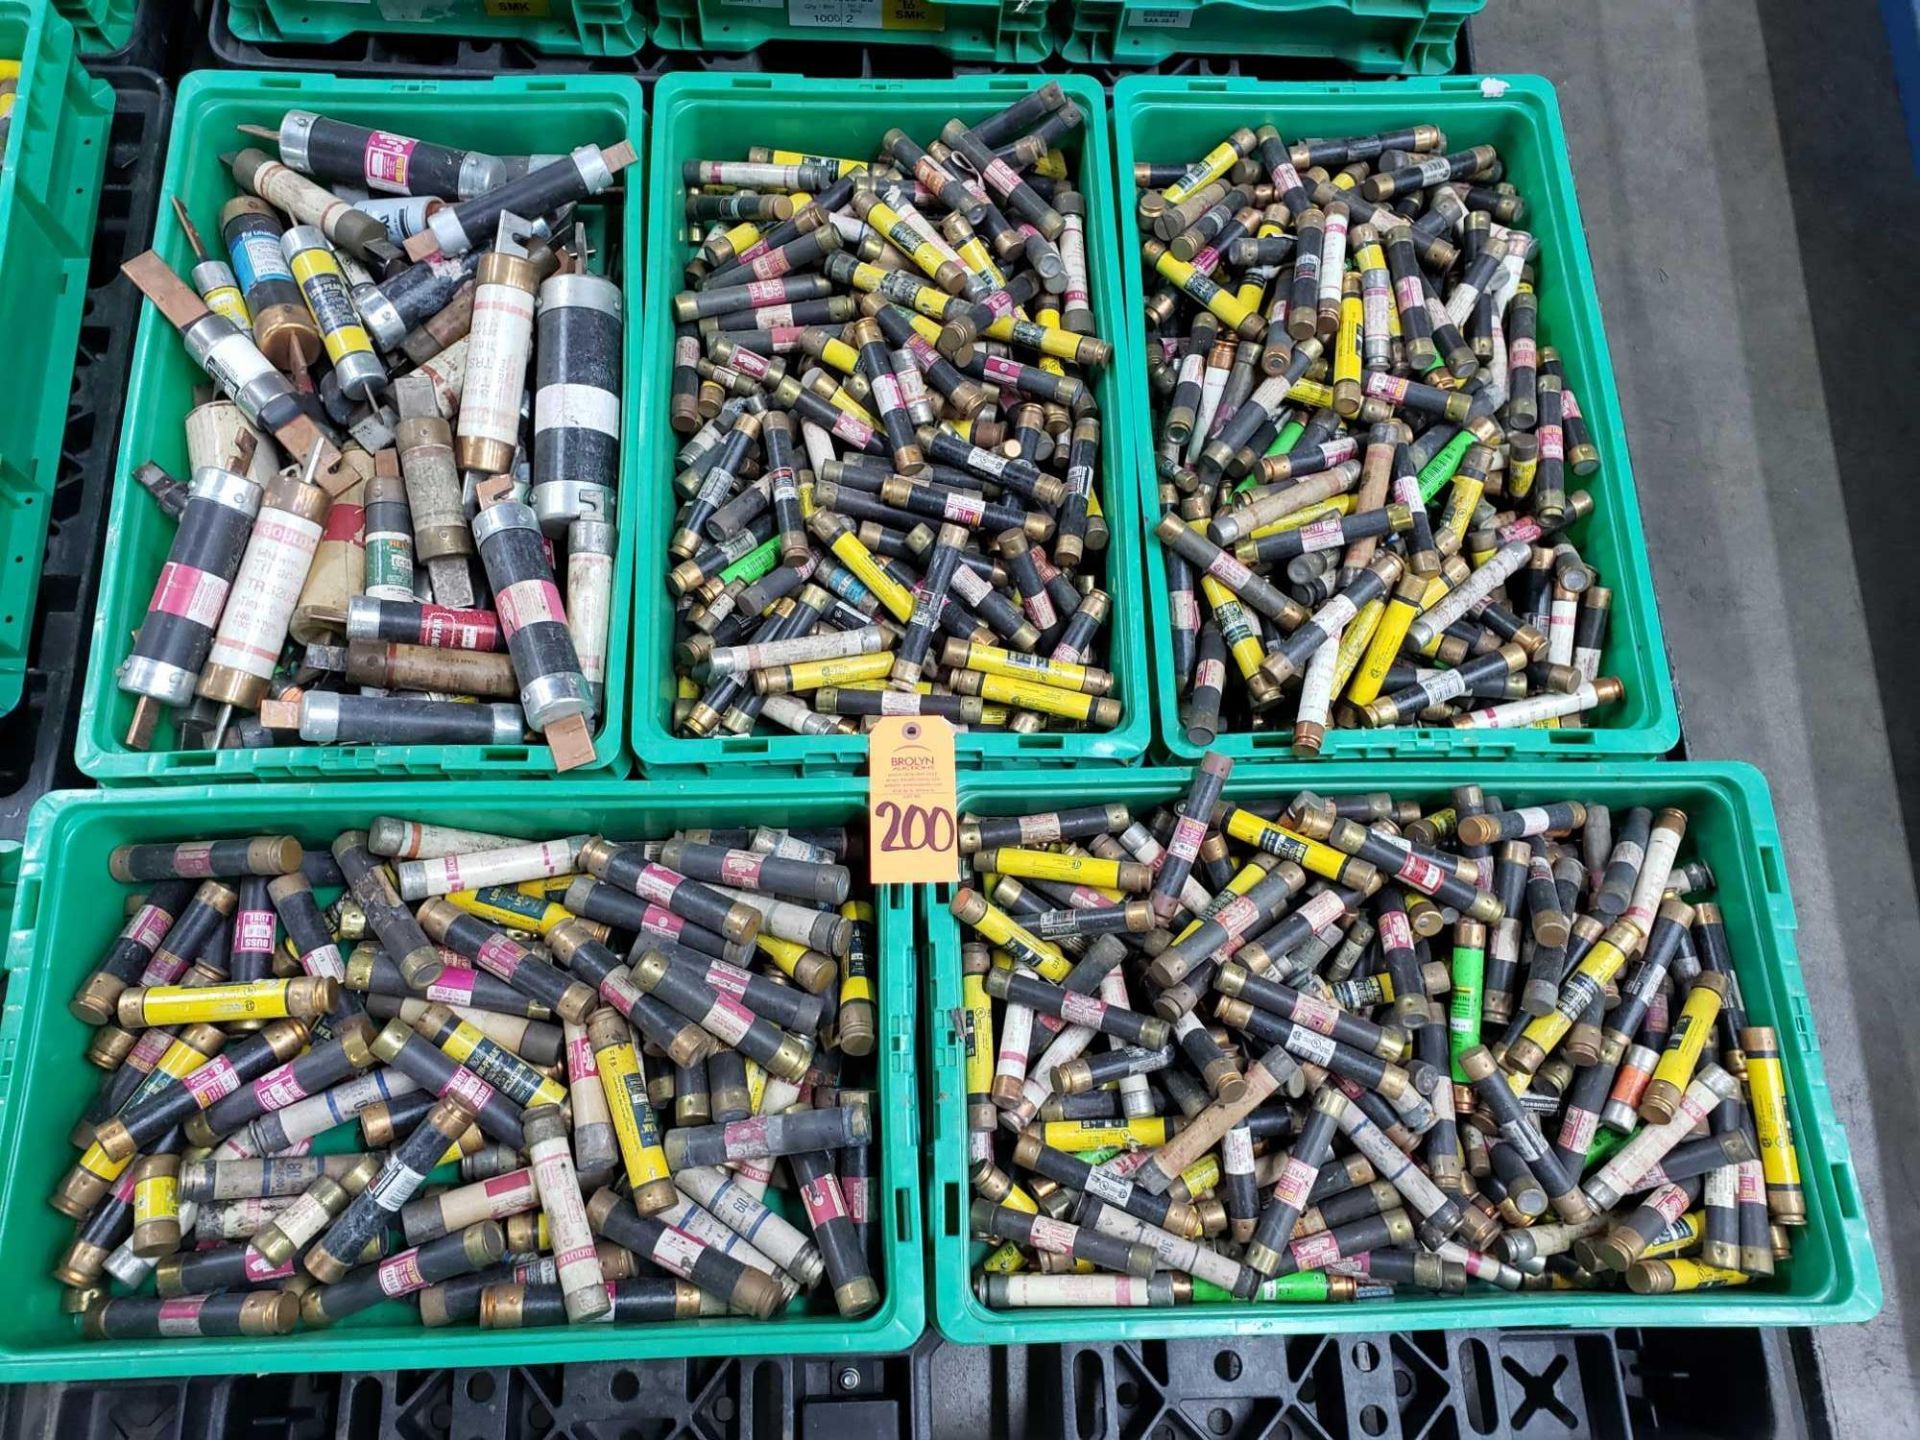 Pallet with large qty of fuses.